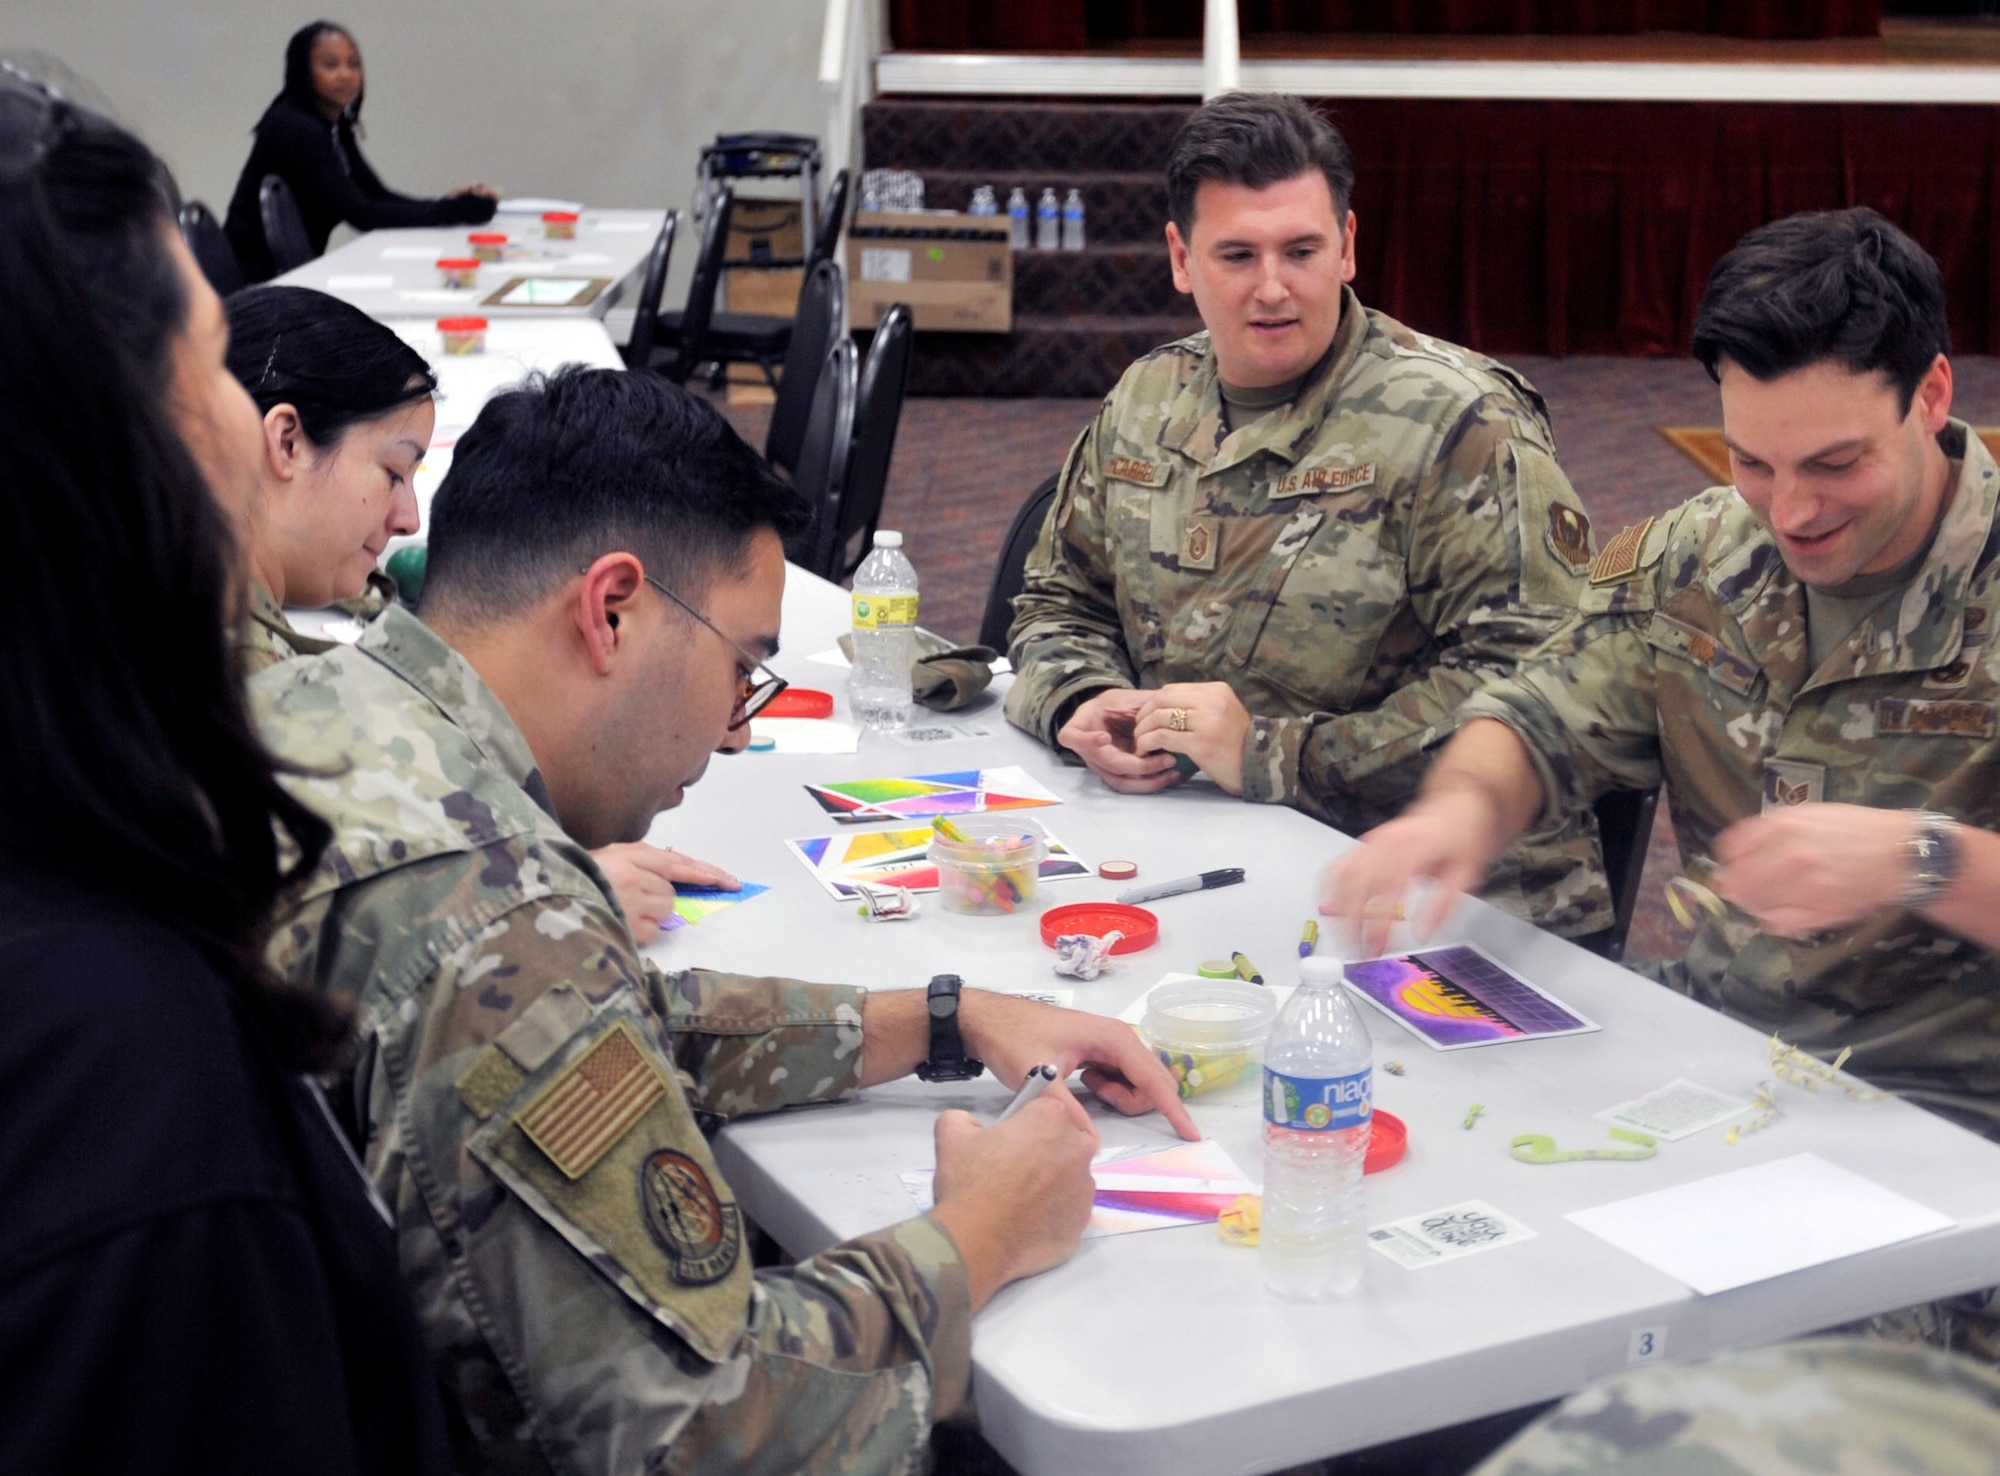 Airmen from different units participate in an Expressive Arts Therapy activity at Joint Base San Antonio-Lackland, Texas on May 6, 2023. The session, hosted by the Recreation Therapy Team from the San Antonio Behavioral Healthcare Hospital, focuses on using a creative outlet to process mental expression, facilitate memory functions, and relieve anxieties or stress. (U.S. Air Force photo by Alex Dieguez)